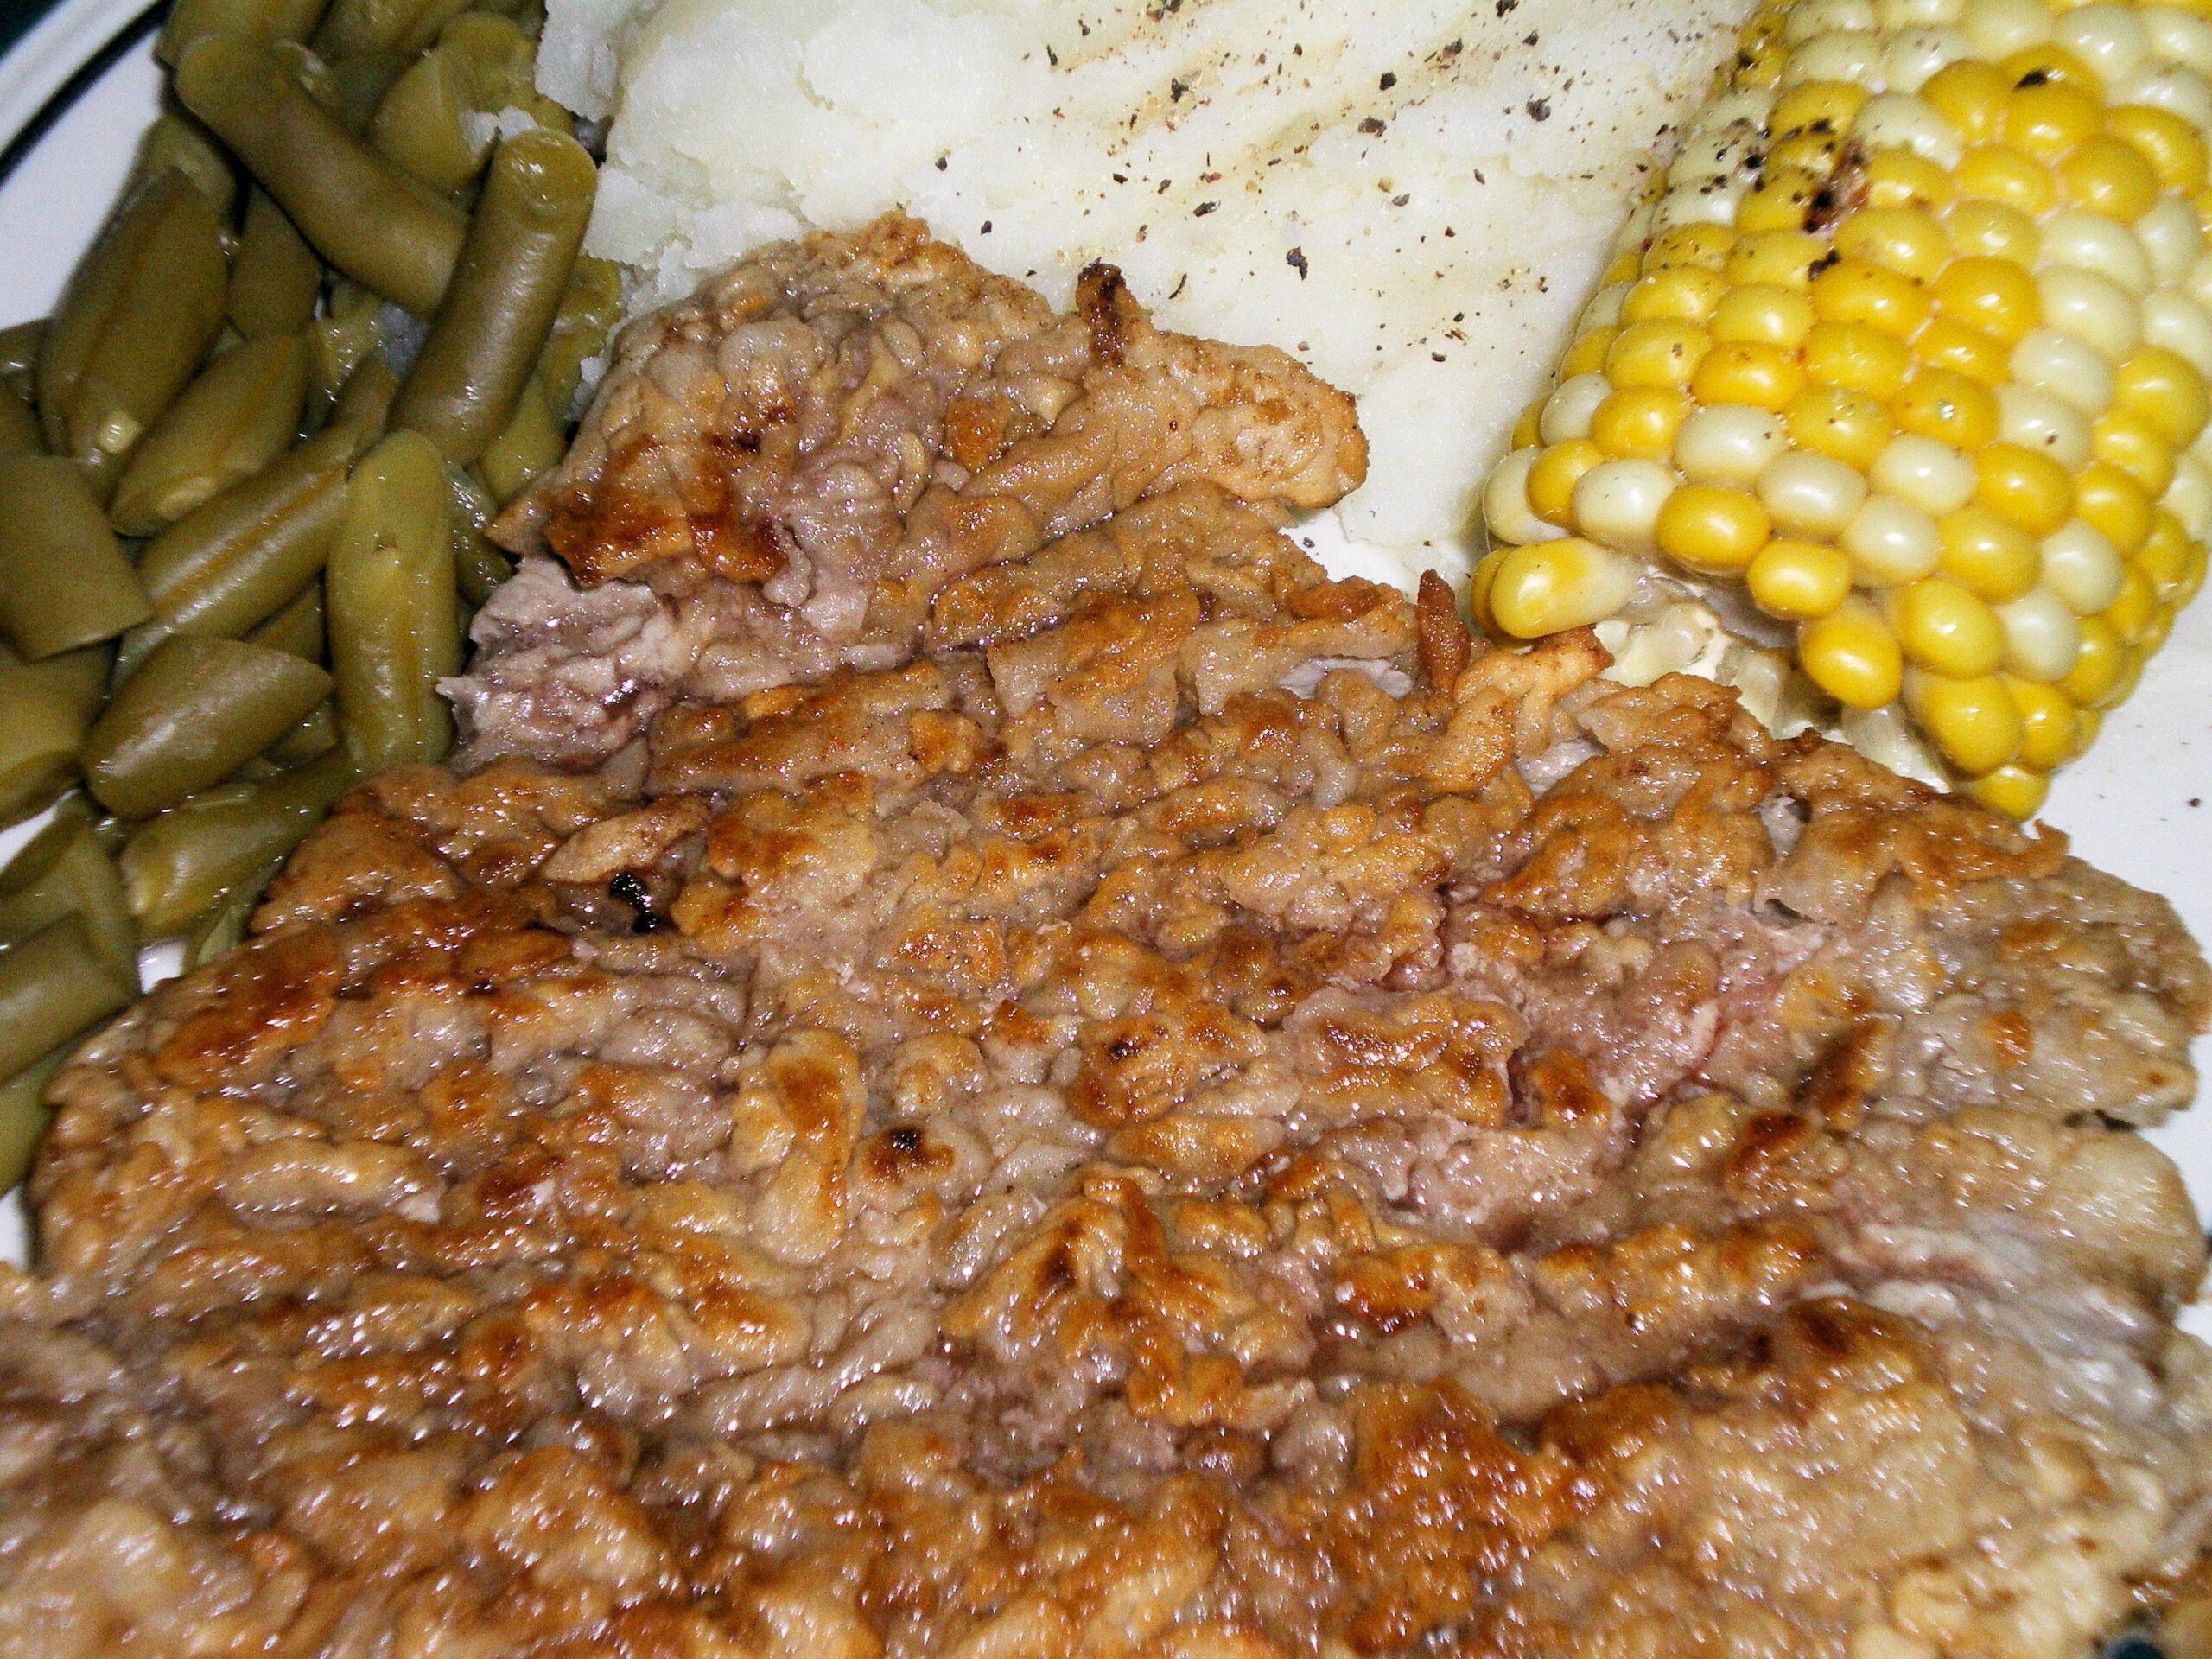  Golden and crispy, these chicken fried steaks are the epitome of southern comfort food.